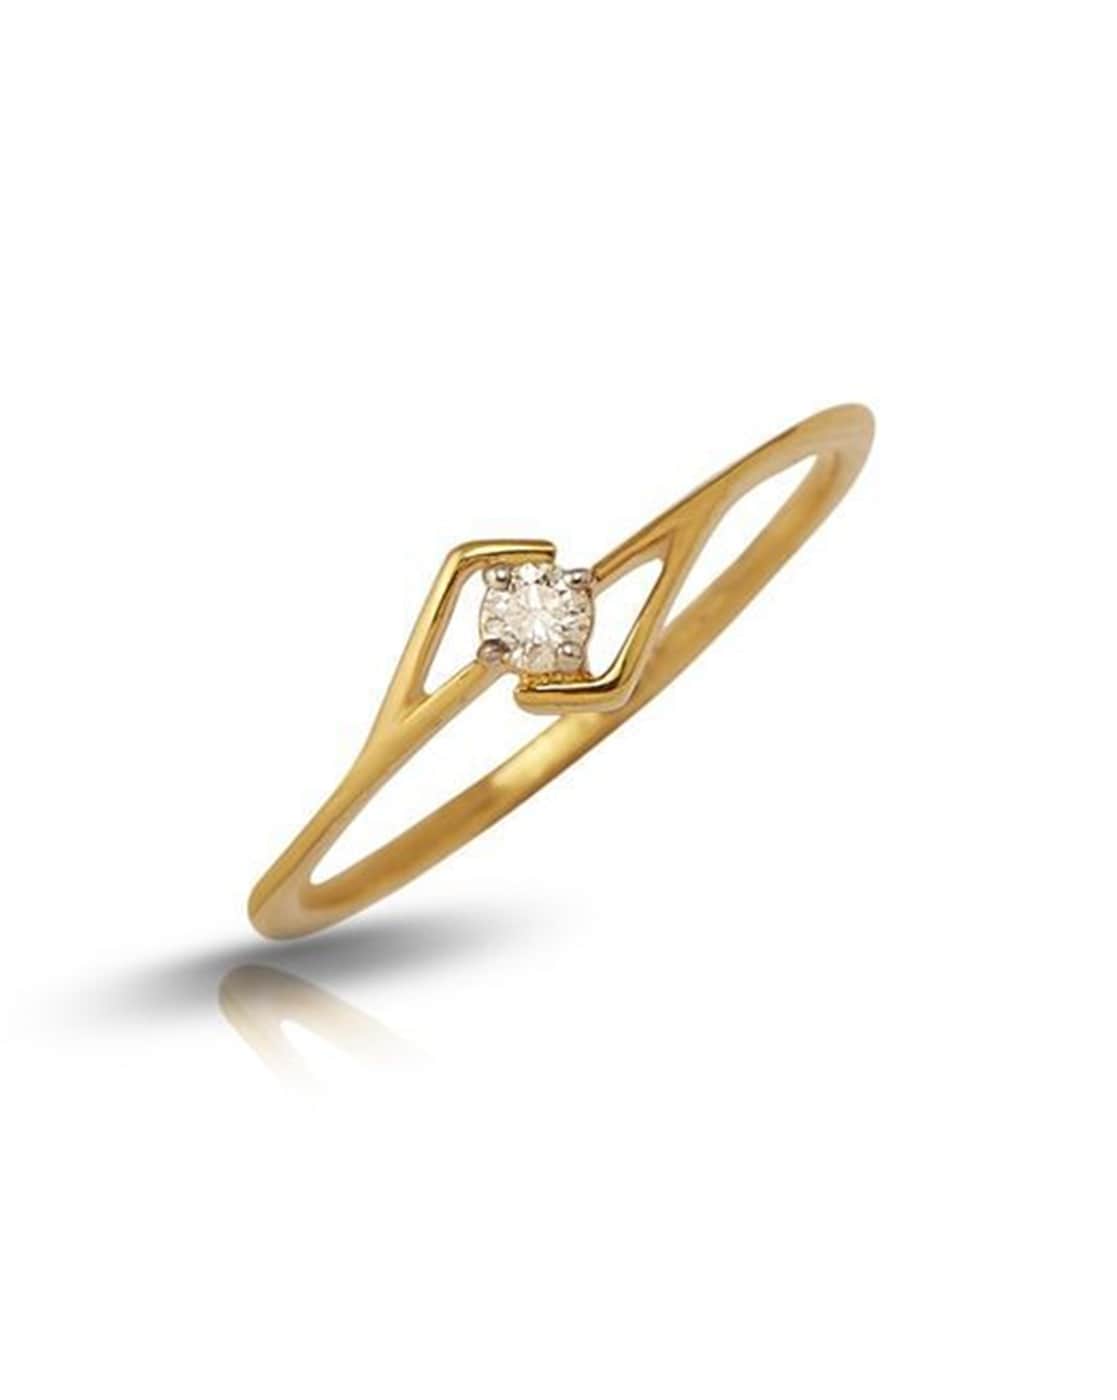 Indian Gold Ring Design for Female Available Online